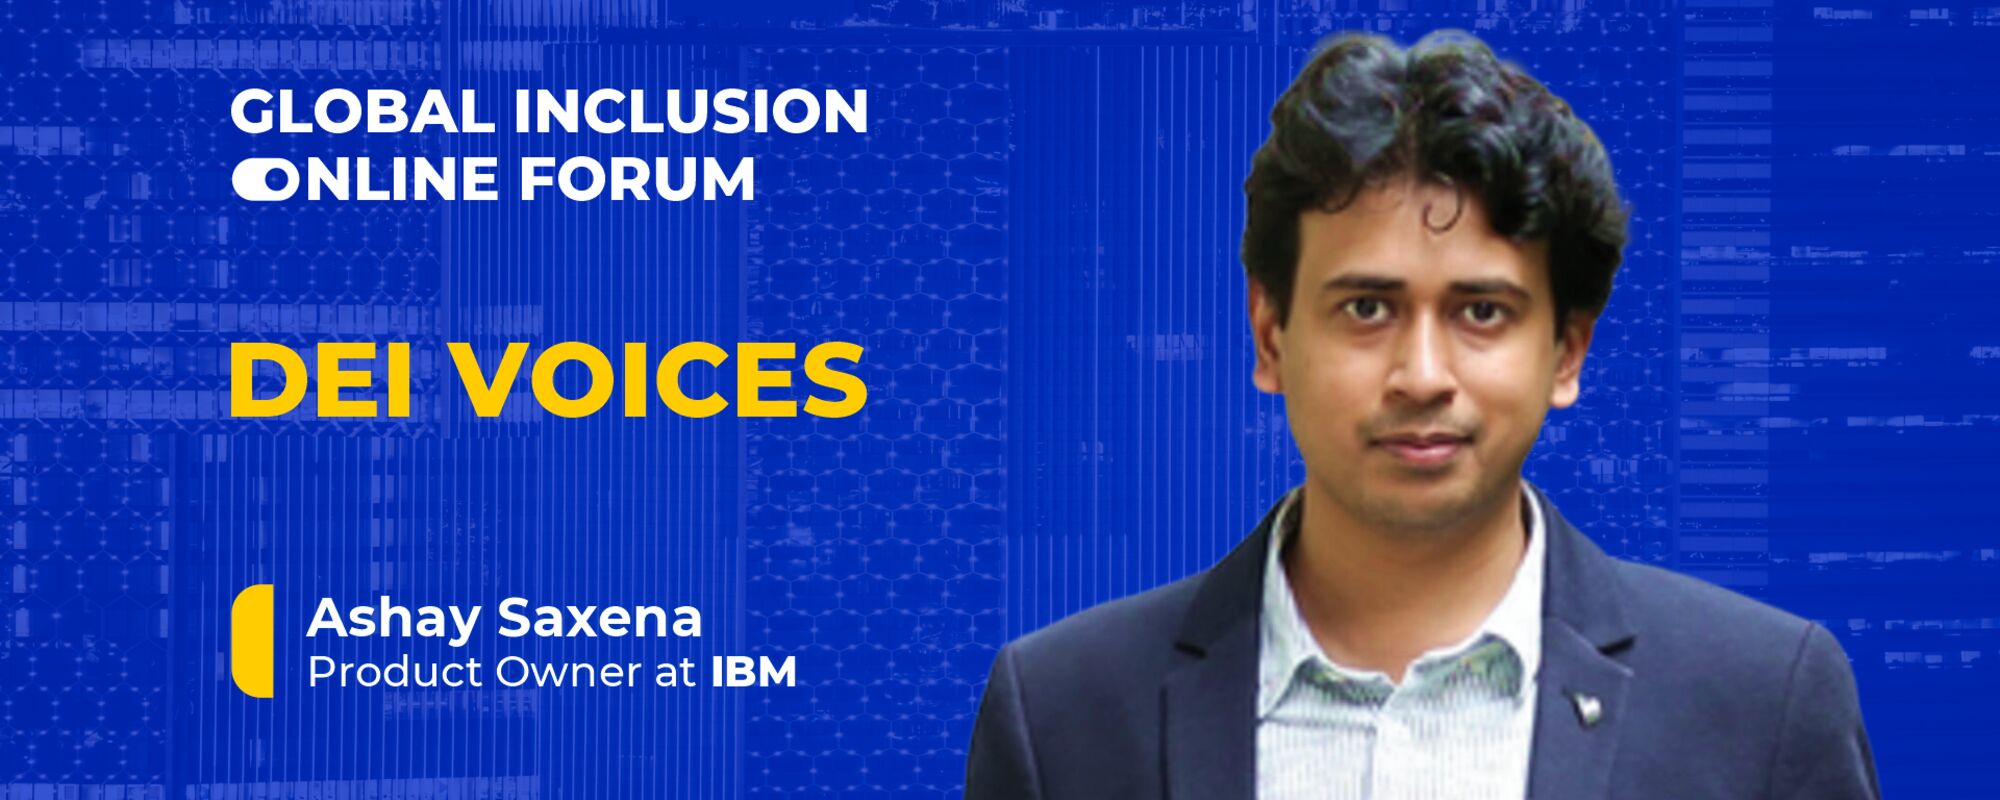 DEI Voices: Dr. Ashay Saxena - Product Owner at IBM